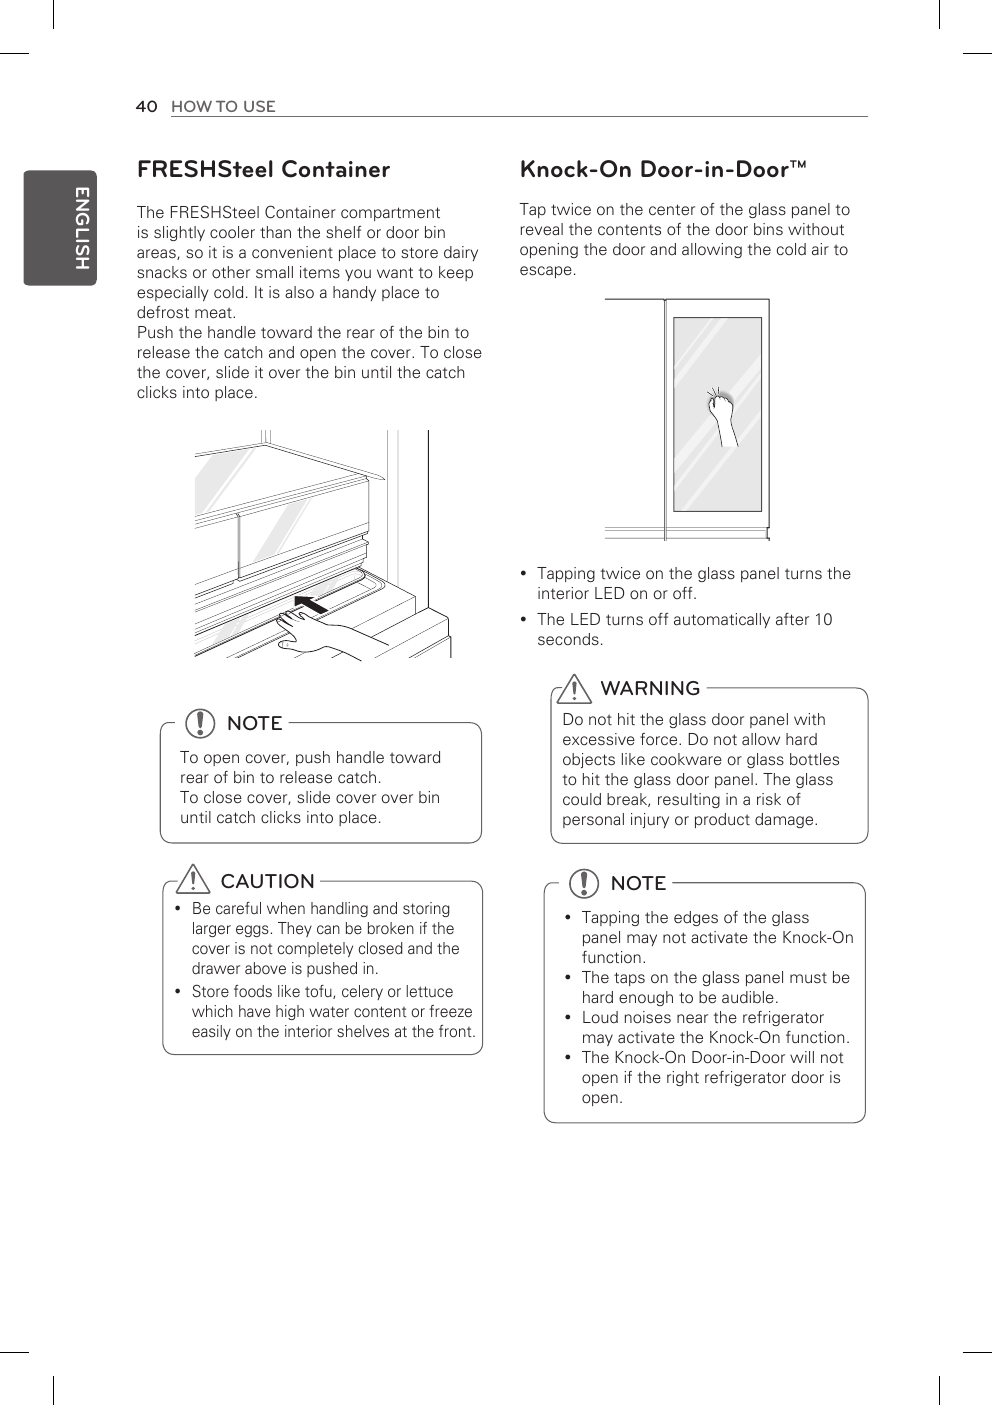 40 HOW TO USEENGLISHKnock-On Door-in-Door™Tap twice on the center of the glass panel toreveal the contents of the door bins withoutopening the door and allowing the cold air toescape.Tapping twice on the glass panel turns the yinterior LED on or off.The LED turns off automatically after 10 yseconds.  CAUTIONBe careful when handling and storing ylarger eggs. They can be broken if thecover is not completely closed and thedrawer above is pushed in.Store foods like tofu, celery or lettuce ywhich have high water content or freezeeasily on the interior shelves at the front.FRESHSteel ContainerThe FRESHSteel Container compartmentis slightly cooler than the shelf or door binareas, so it is a convenient place to store dairysnacks or other small items you want to keep especially cold. It is also a handy place todefrost meat.Push the handle toward the rear of the bin torelease the catch and open the cover. To closethe cover, slide it over the bin until the catchclicks into place.  NOTETapping the edges of the glass ypanel may not activate the Knock-Onfunction.The taps on the glass panel must be yhard enough to be audible.Loud noises near the refrigerator ymay activate the Knock-On function.The Knock-On Door-in-Door will not yopen if the right refrigerator door isopen.WARNINGDo not hit the glass door panel withexcessive force. Do not allow hardobjects like cookware or glass bottlesto hit the glass door panel. The glass could break, resulting in a risk ofpersonal injury or product damage.  NOTETo open cover, push handle towardrear of bin to release catch.To close cover, slide cover over binuntil catch clicks into place.